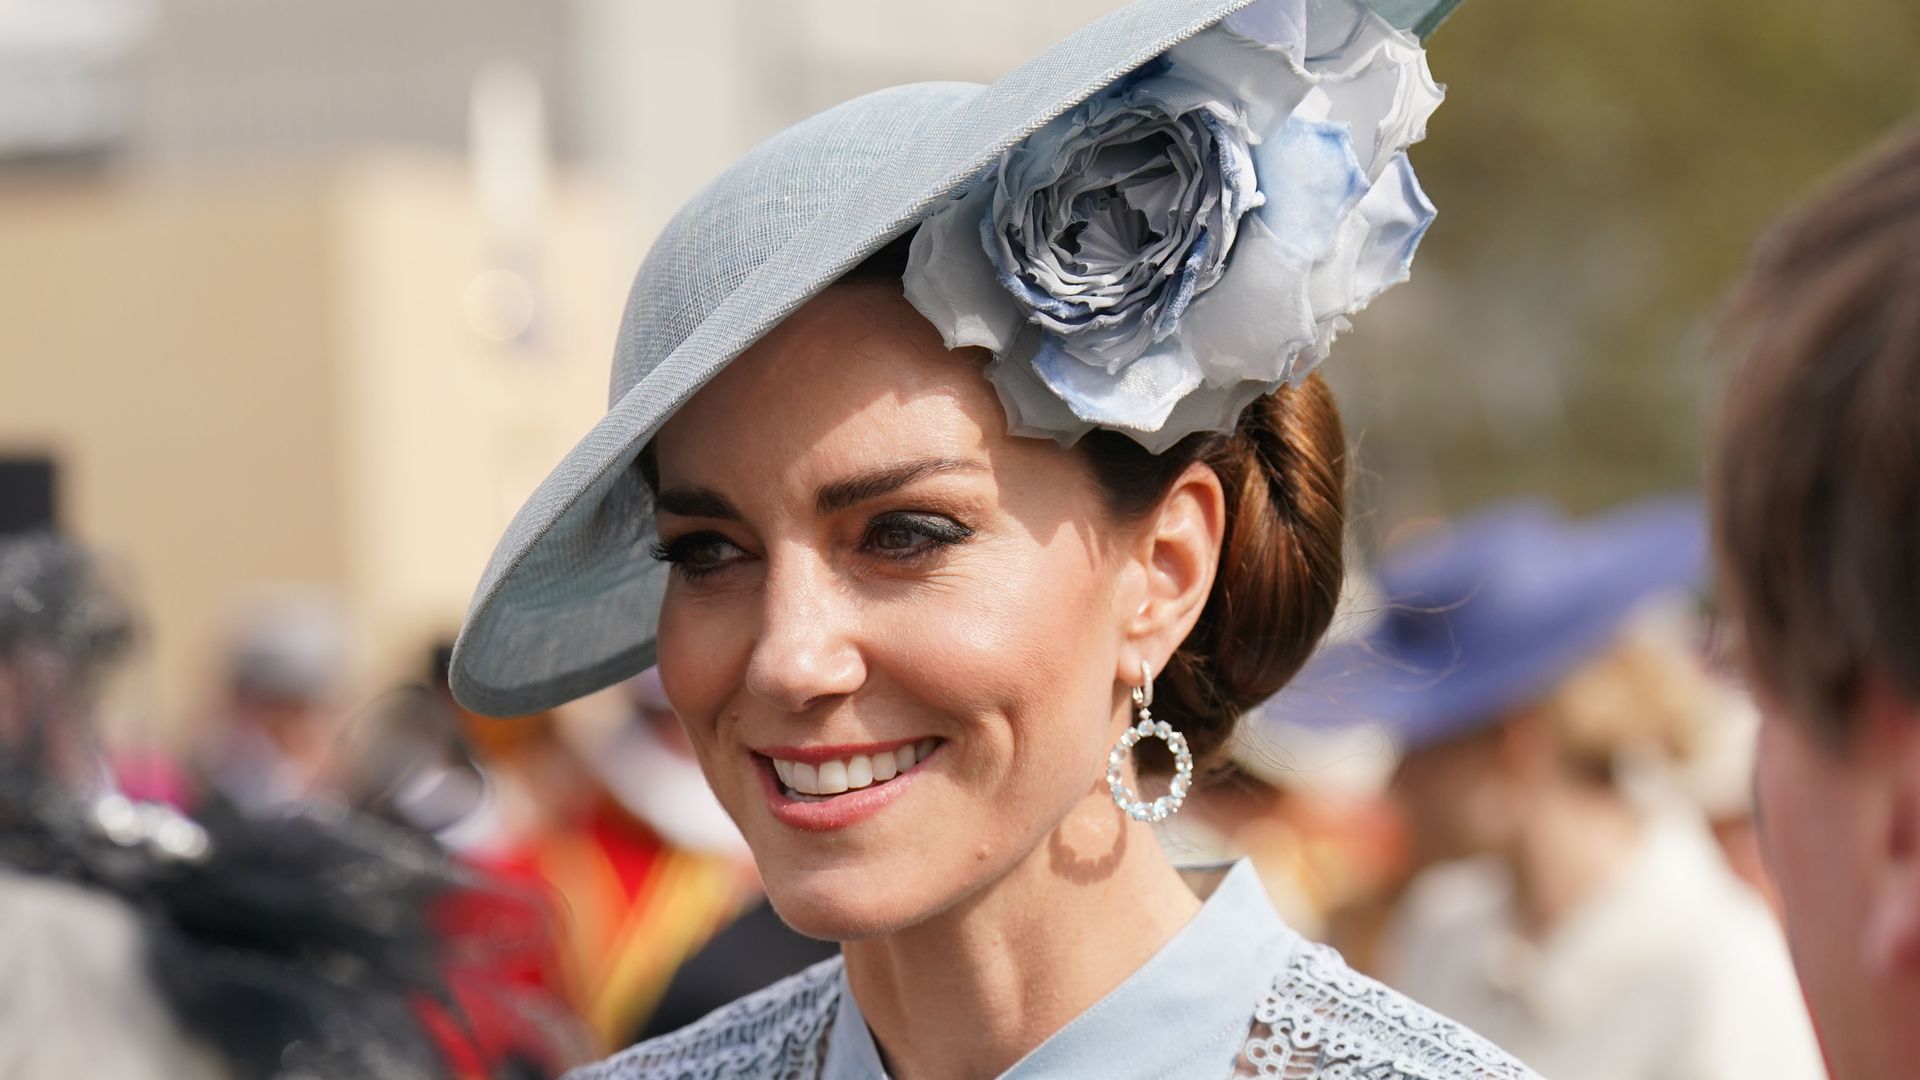 The special meaning behind Princess Kate's incredible new honour from King Charles